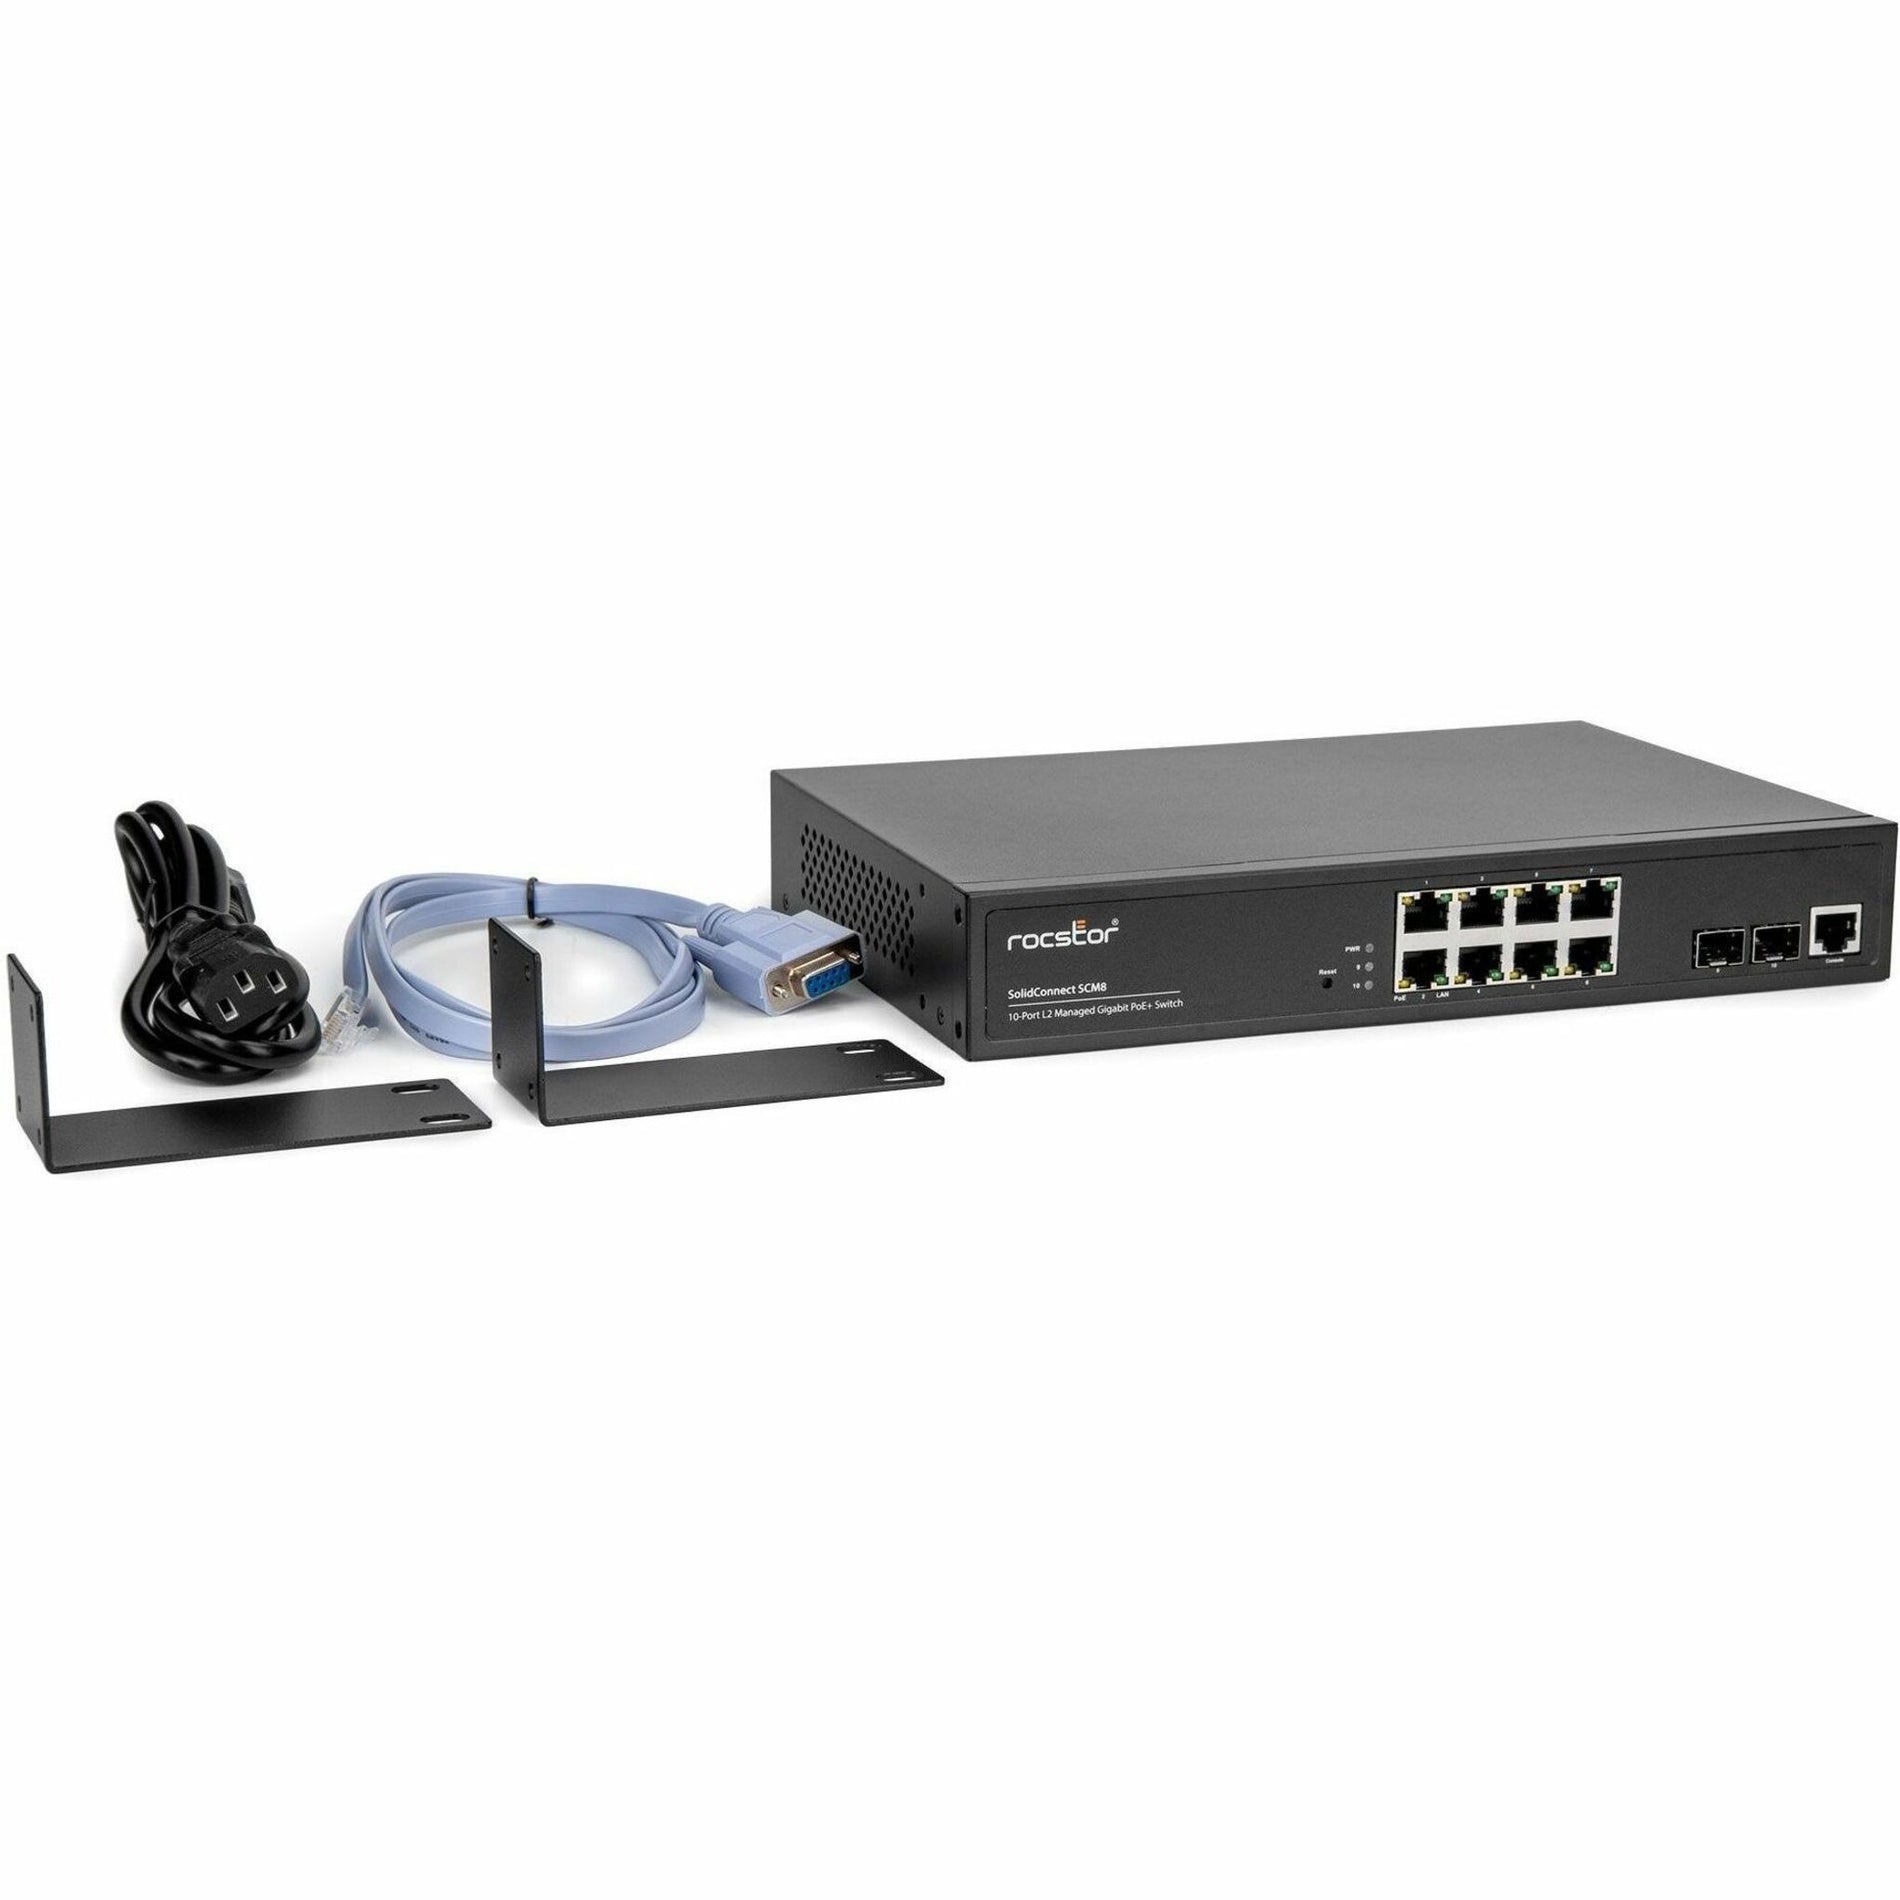 Rocstor Y10S009-B1 SolidConnect SCM8 8-Port PoE+ Gigabit Managed Switch with 2 SFP Ports, Industrial Network Government